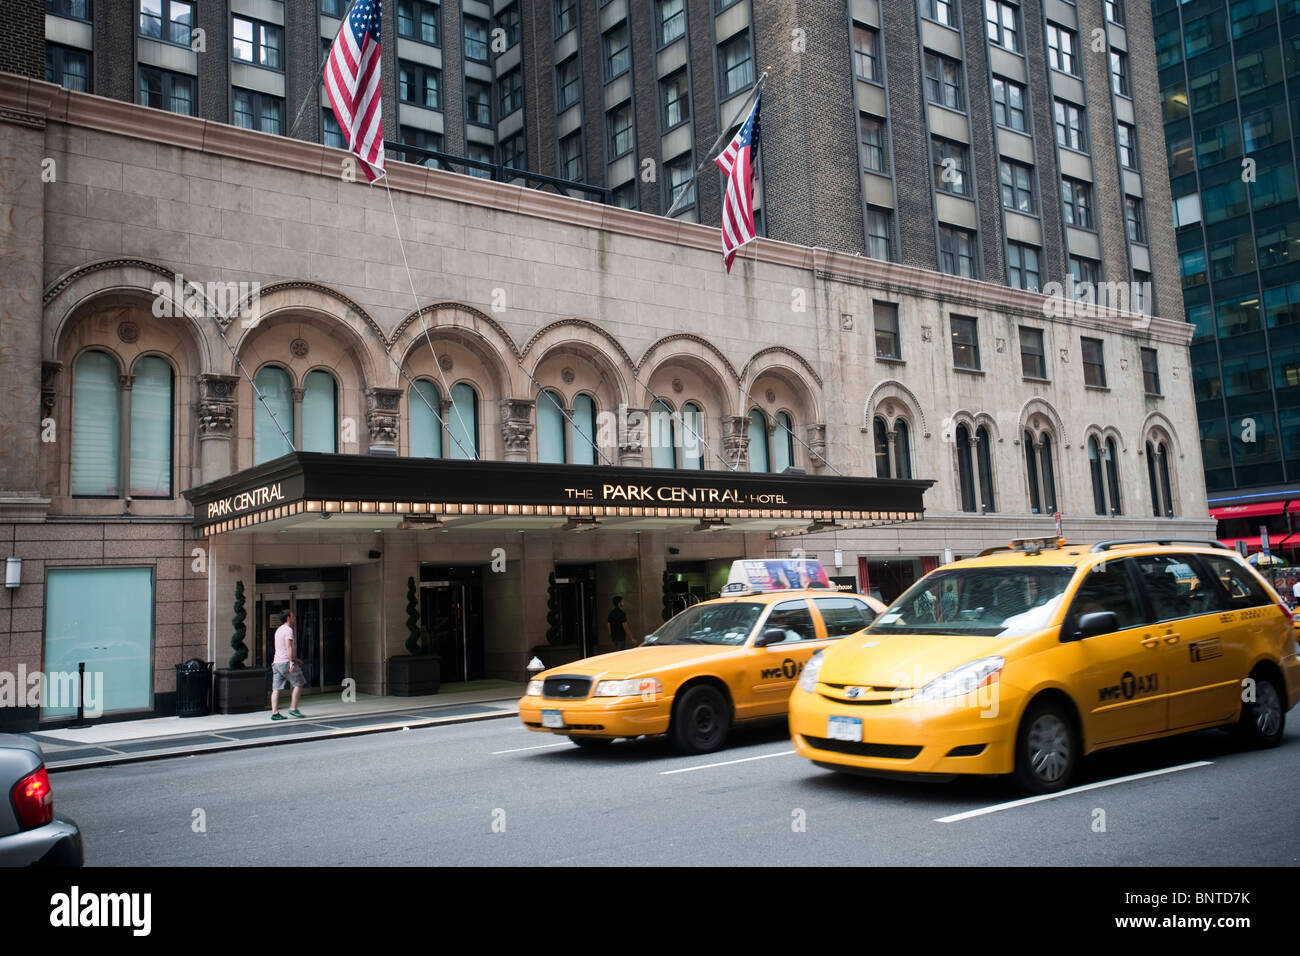 The Park Central Hotel in Midtown Manhattan in New York on Wednesday